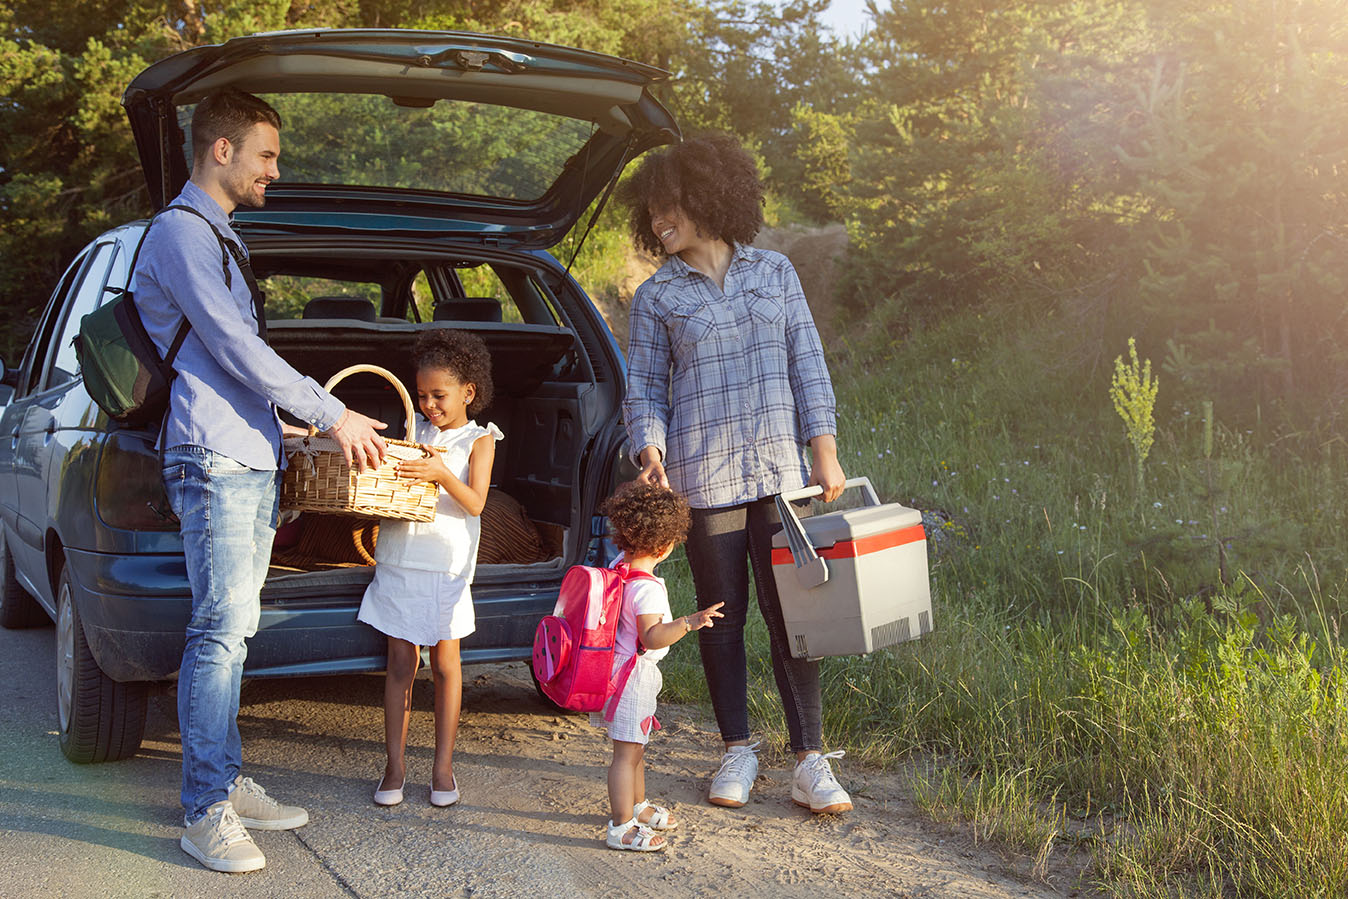 A family with two young children unpack coolers and snacks from the back of their car.